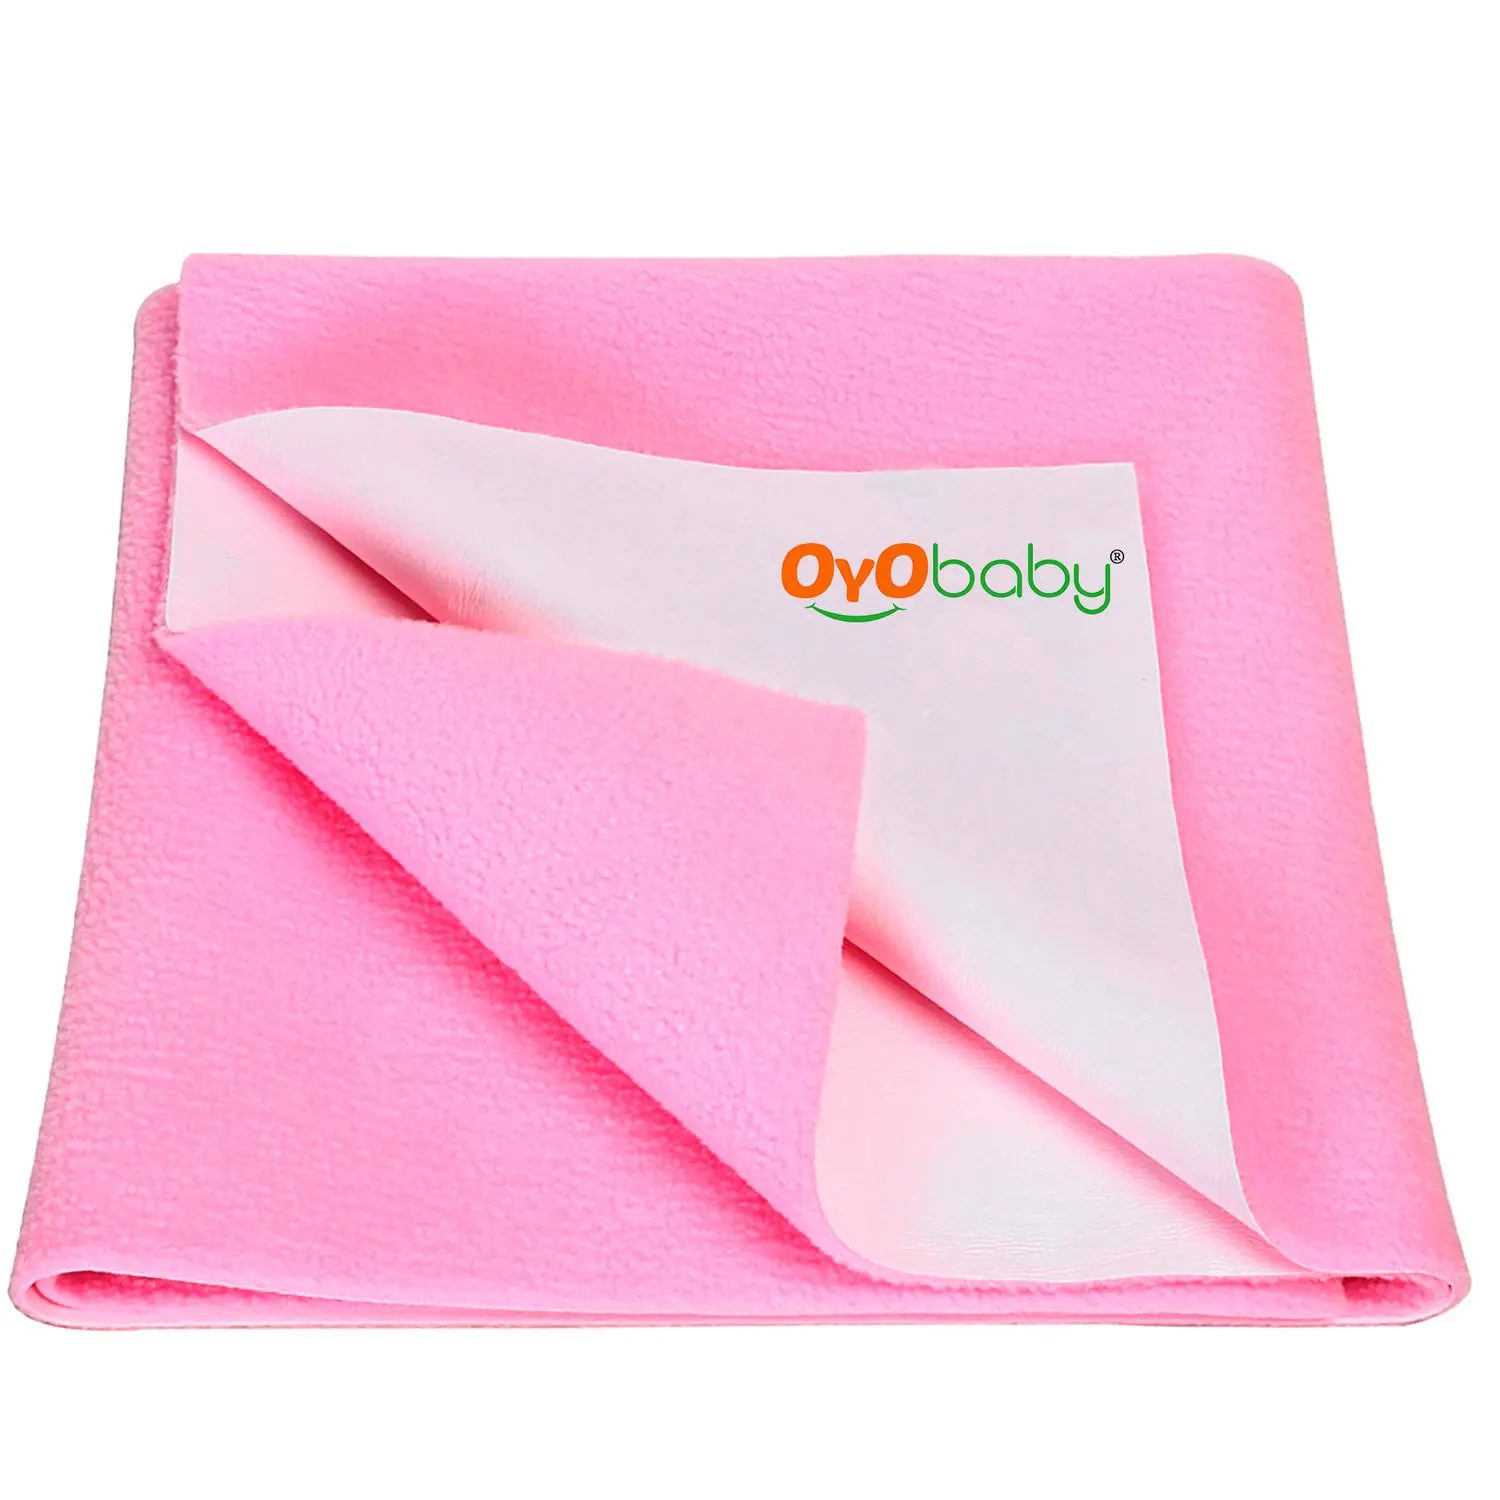 OYO Baby Waterproof Bed Protector Baby Dry Sheet, Small, Pink (50 cm x 70 cm)